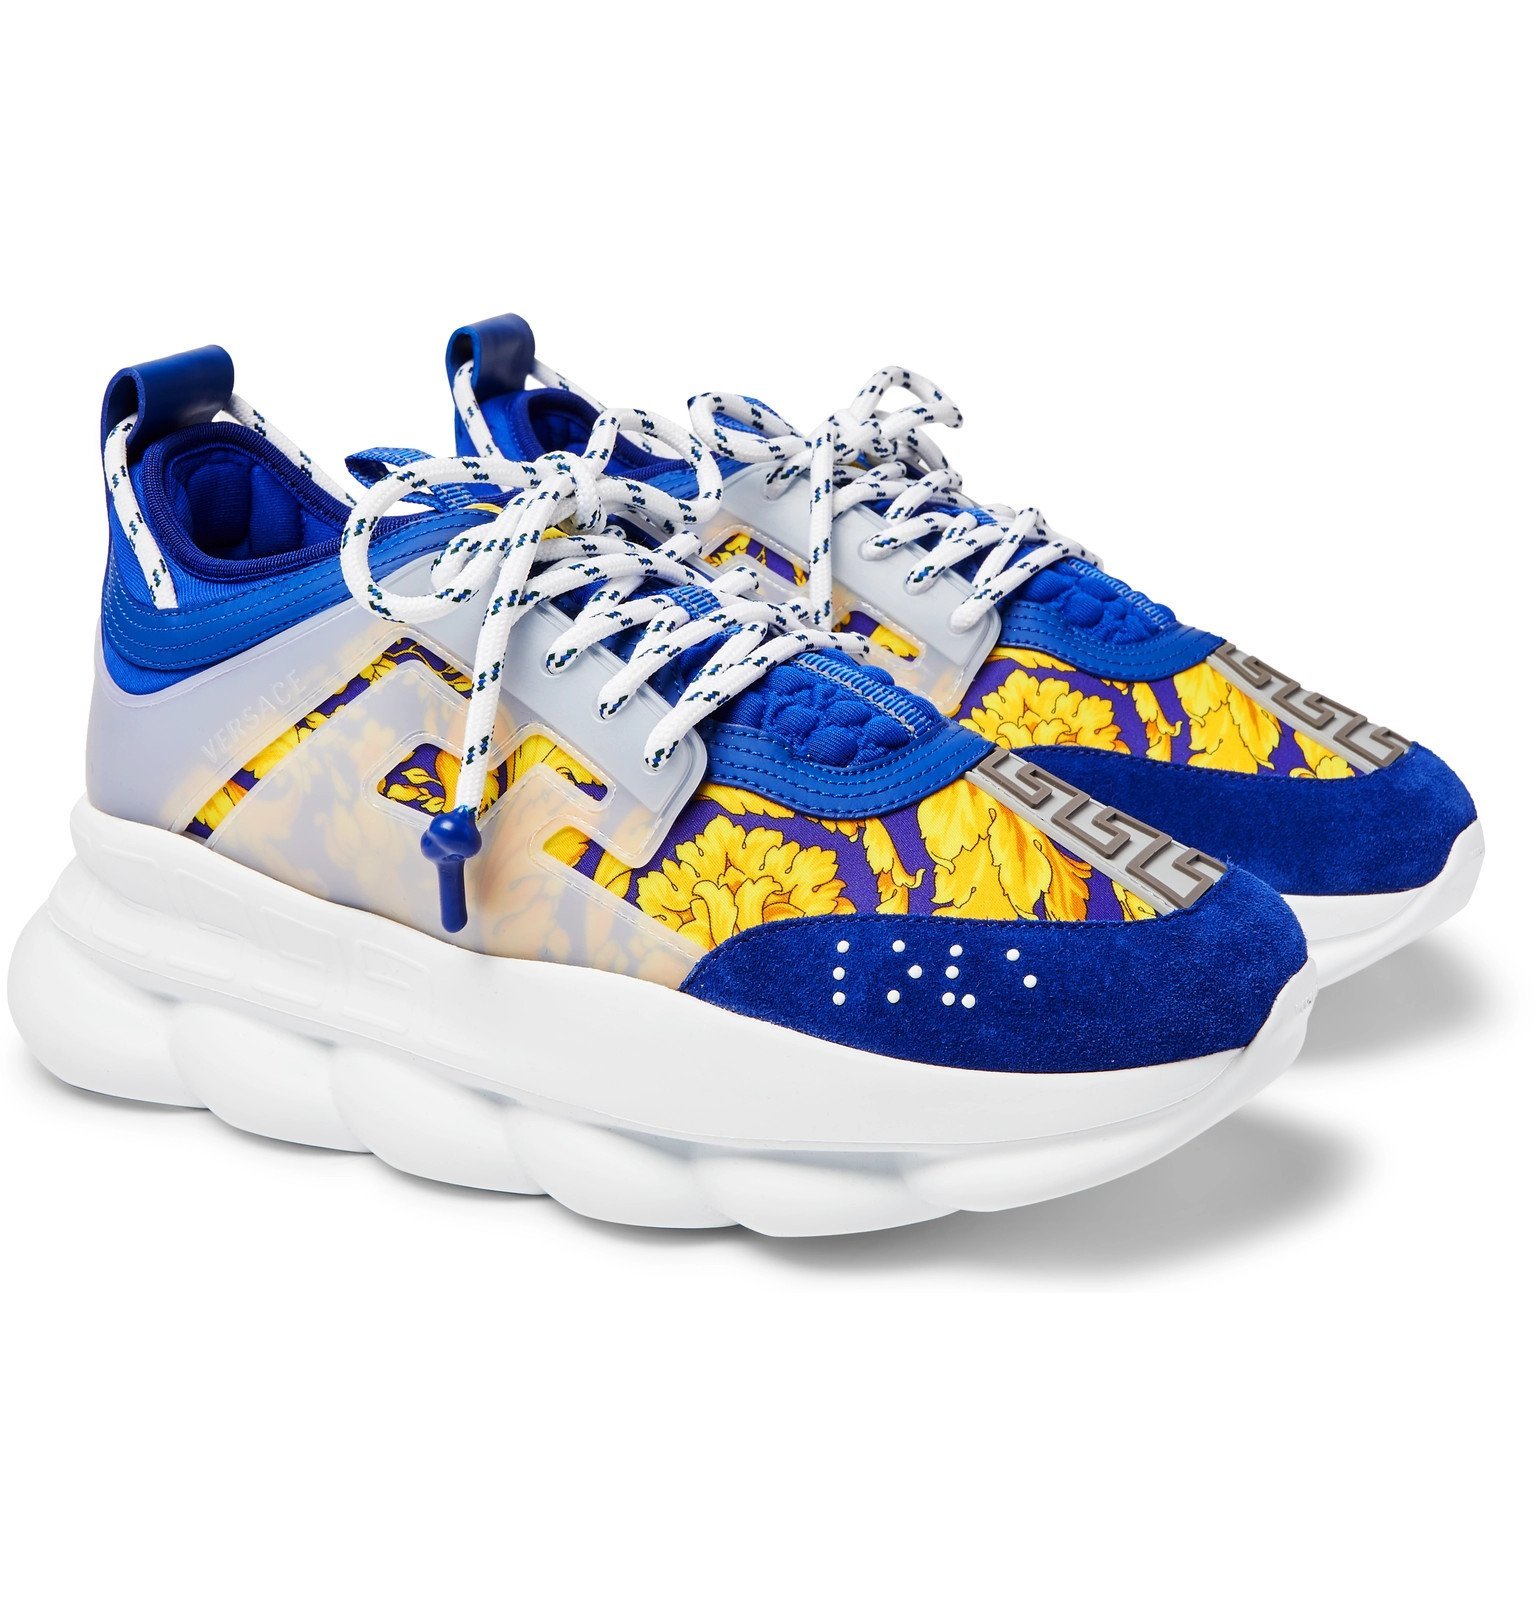 versace chain reaction sneakers blue